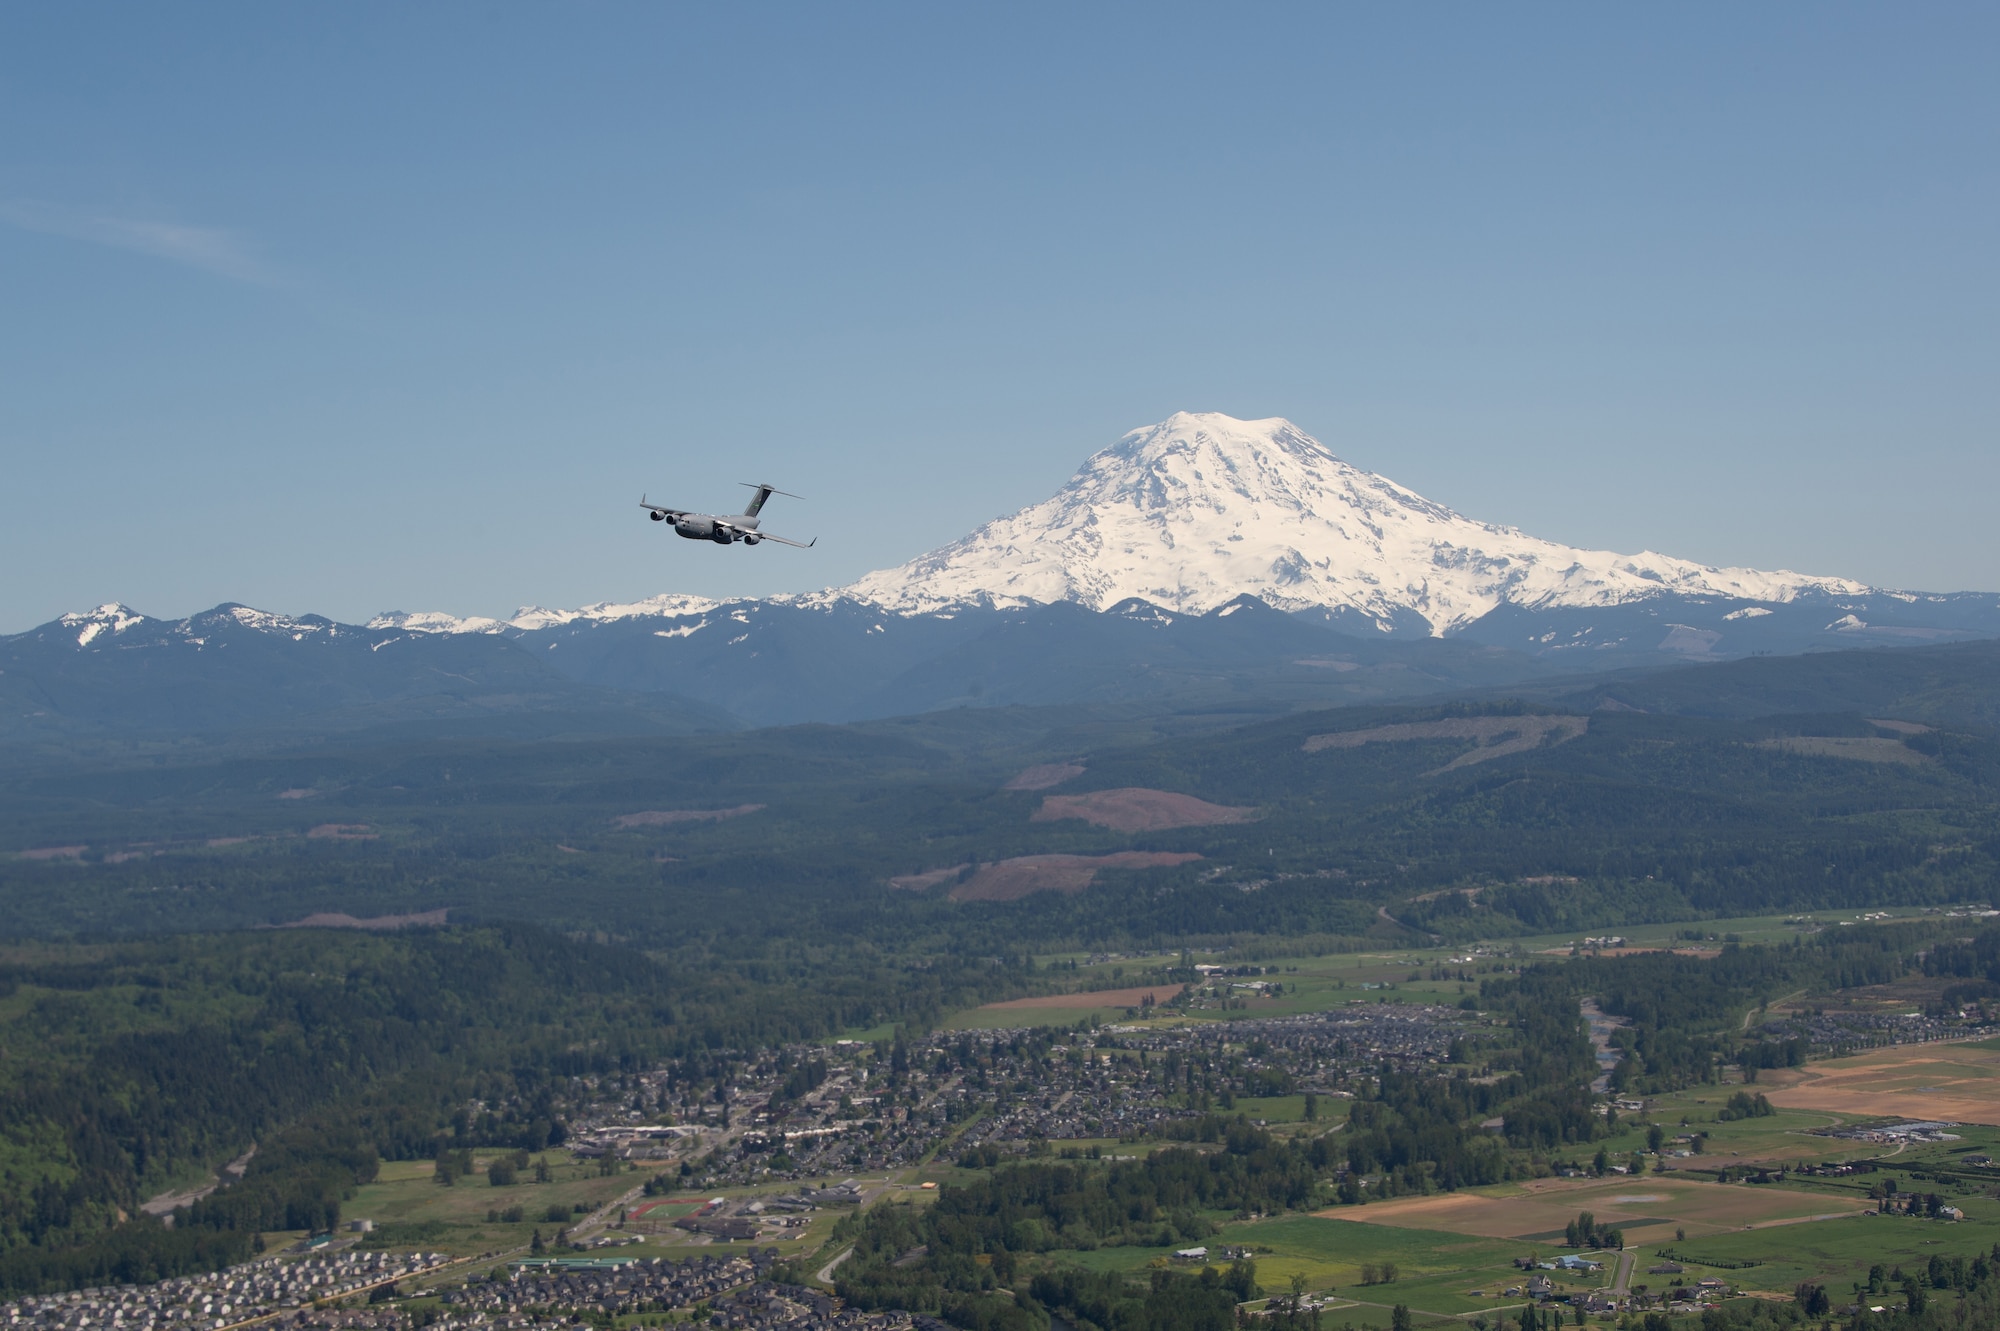 A C-17 Globemaster III assigned to the 62nd Airlift Wing conducts an Air Force Salutes morale flyover across the Puget Sound region, May 8, 2020. The flyover honored the American heroes at the forefront in the fight against COVID-19. (U.S. Air Force photo by Senior Airman Sara Hoerichs)